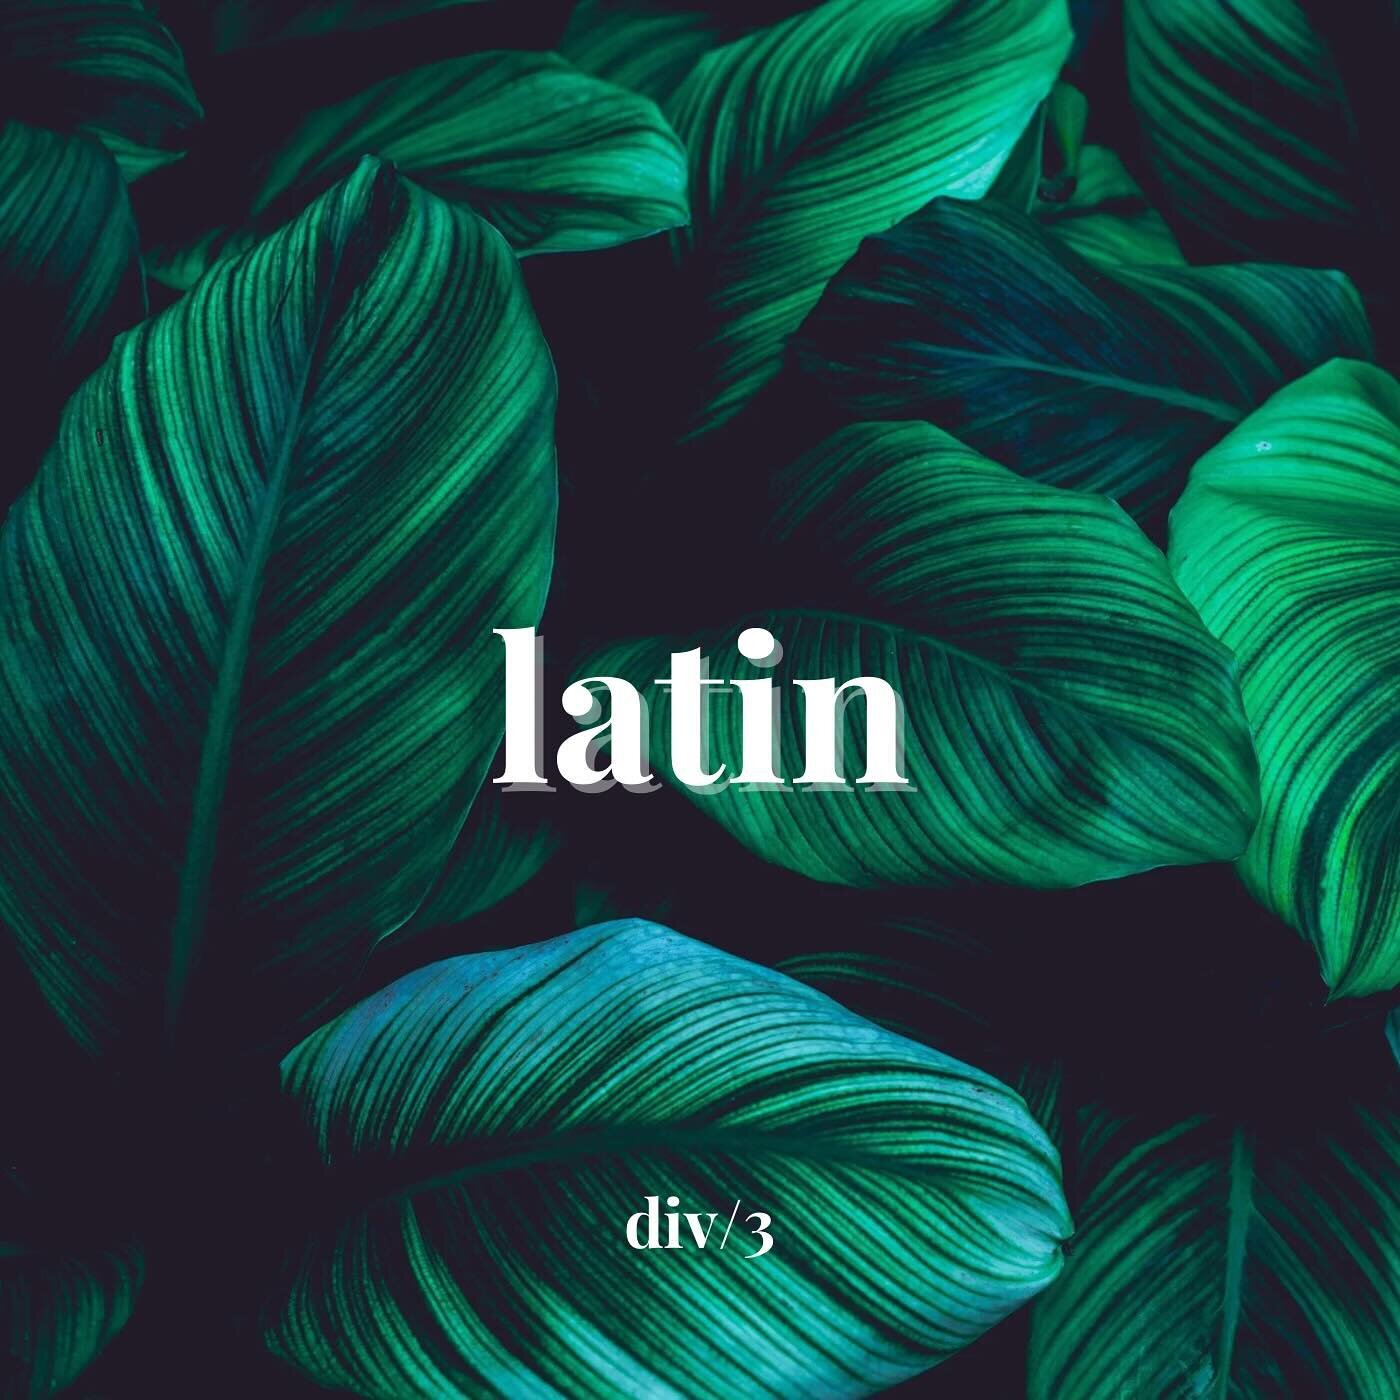 New playlist, check it out 🎶 #linkinbio 

#nowplaying #music #latin #latinmusic #spanish #spain #southamerica #playlist #spotify #musiclover #instagood #instagram #instadaily